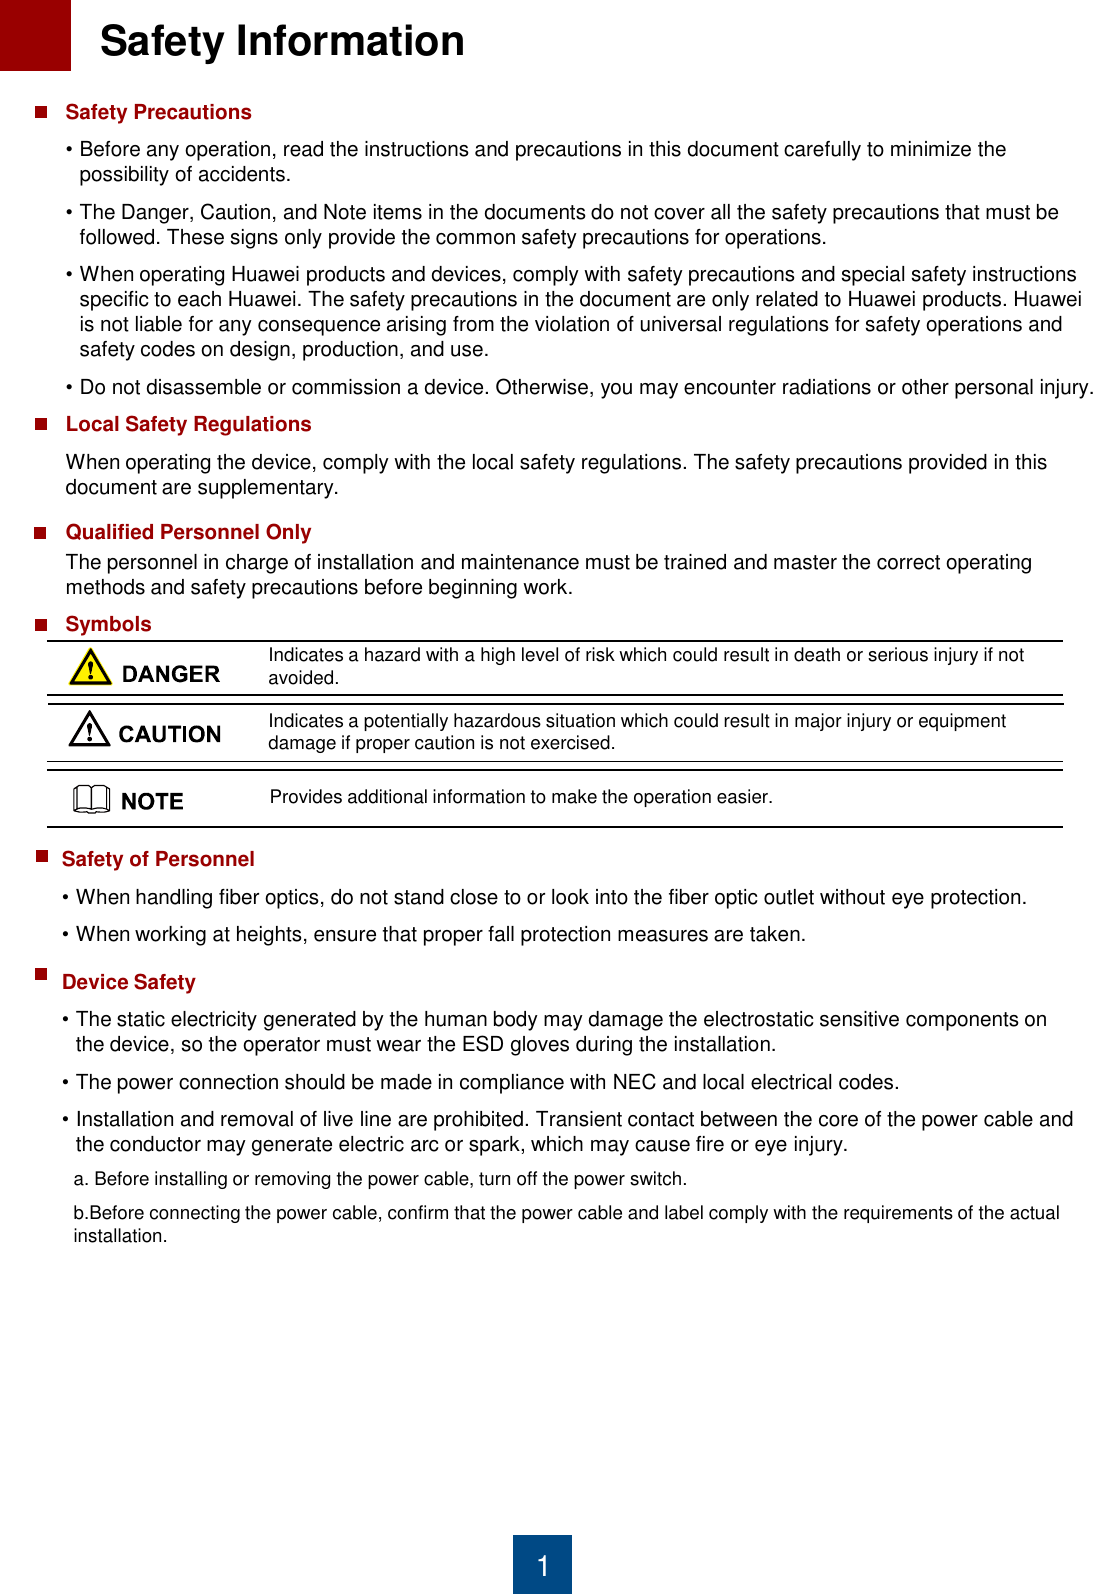 1 Safety Precautions •Before any operation, read the instructions and precautions in this document carefully to minimize the possibility of accidents.  •The Danger, Caution, and Note items in the documents do not cover all the safety precautions that must be followed. These signs only provide the common safety precautions for operations. •When operating Huawei products and devices, comply with safety precautions and special safety instructions specific to each Huawei. The safety precautions in the document are only related to Huawei products. Huawei is not liable for any consequence arising from the violation of universal regulations for safety operations and safety codes on design, production, and use. •Do not disassemble or commission a device. Otherwise, you may encounter radiations or other personal injury. Local Safety Regulations When operating the device, comply with the local safety regulations. The safety precautions provided in this document are supplementary. Qualified Personnel Only The personnel in charge of installation and maintenance must be trained and master the correct operating methods and safety precautions before beginning work. Symbols Indicates a hazard with a high level of risk which could result in death or serious injury if not avoided.  Indicates a potentially hazardous situation which could result in major injury or equipment damage if proper caution is not exercised. Provides additional information to make the operation easier. Safety of Personnel •When handling fiber optics, do not stand close to or look into the fiber optic outlet without eye protection. •When working at heights, ensure that proper fall protection measures are taken.  Device Safety •The static electricity generated by the human body may damage the electrostatic sensitive components on the device, so the operator must wear the ESD gloves during the installation.  •The power connection should be made in compliance with NEC and local electrical codes. •Installation and removal of live line are prohibited. Transient contact between the core of the power cable and the conductor may generate electric arc or spark, which may cause fire or eye injury. a. Before installing or removing the power cable, turn off the power switch. b.Before connecting the power cable, confirm that the power cable and label comply with the requirements of the actual      installation. 1  Safety Information 